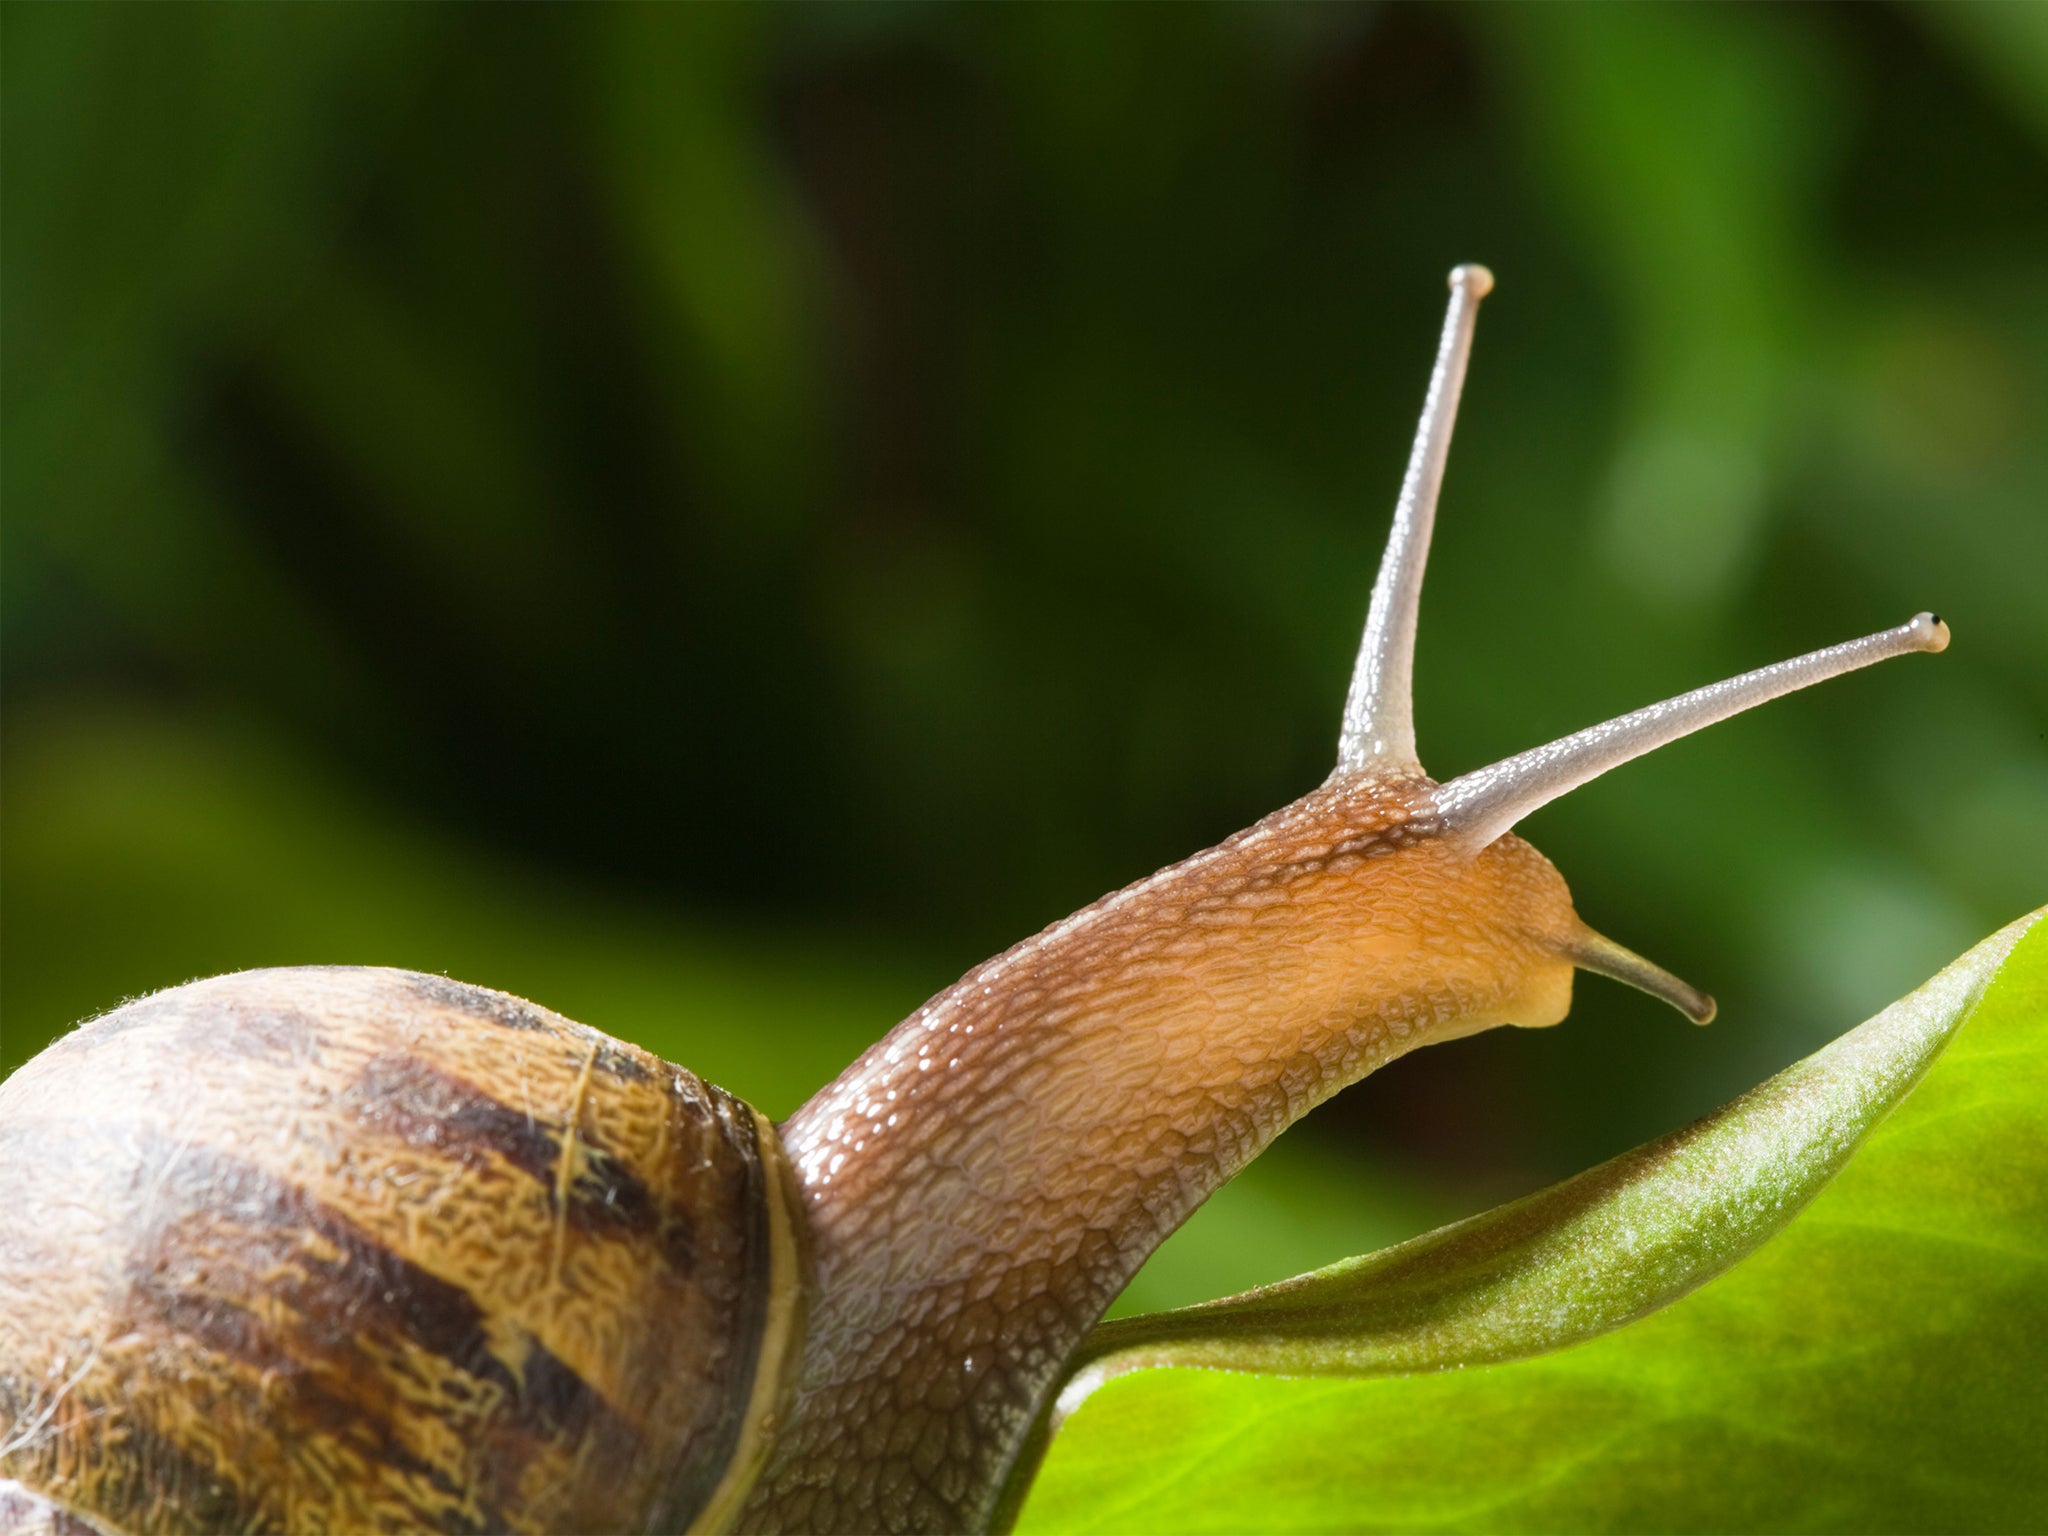 Snails are useful for studying how memories are formed because their neurons are large and relatively easy to work with